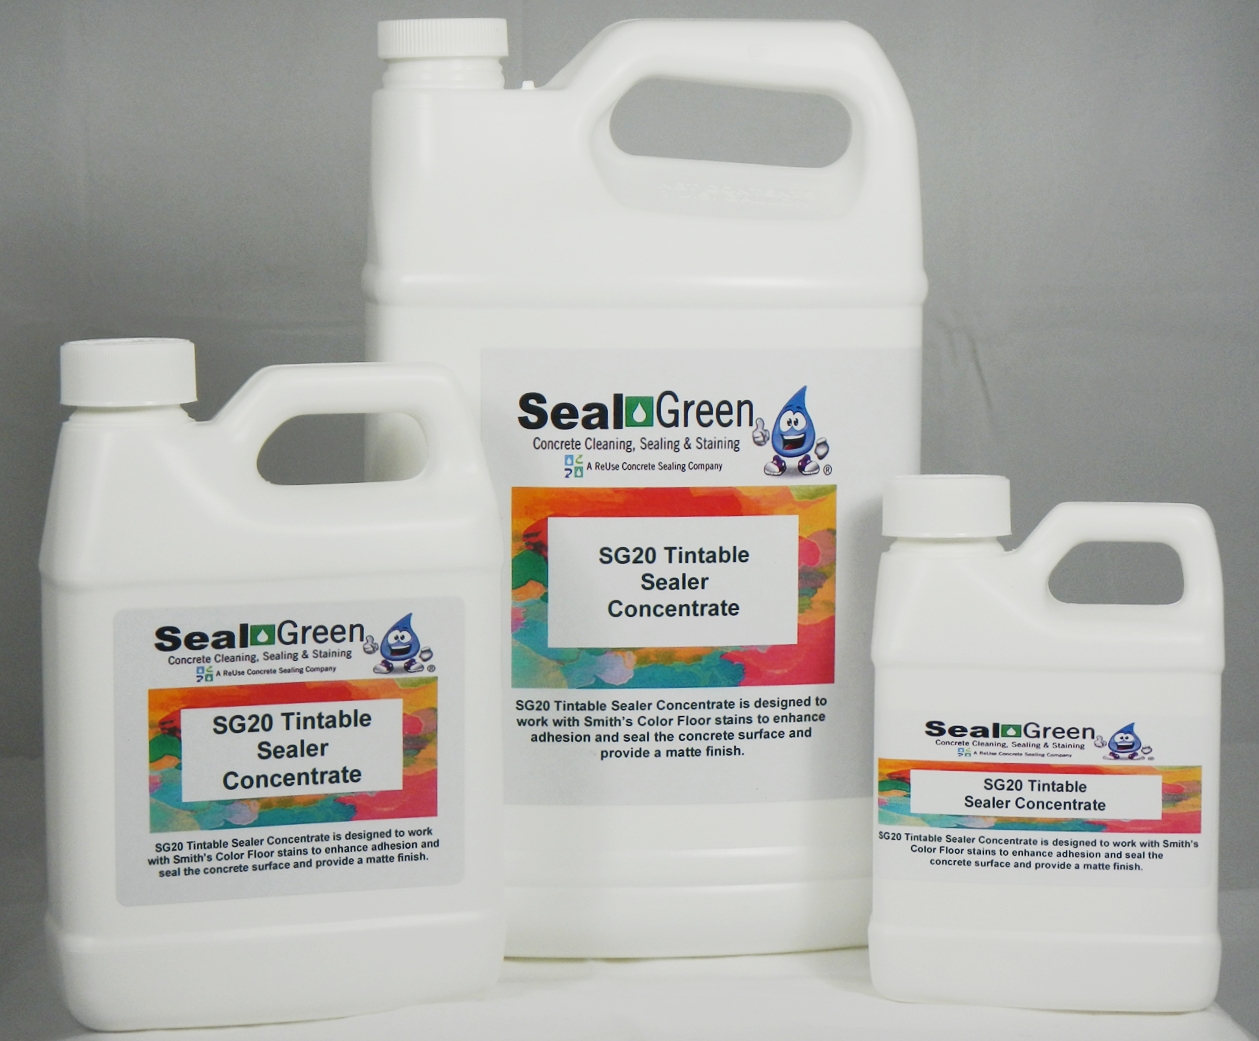 What is the coverage area for the quart and gallon SG20 Tintable Sealer Concentrate?